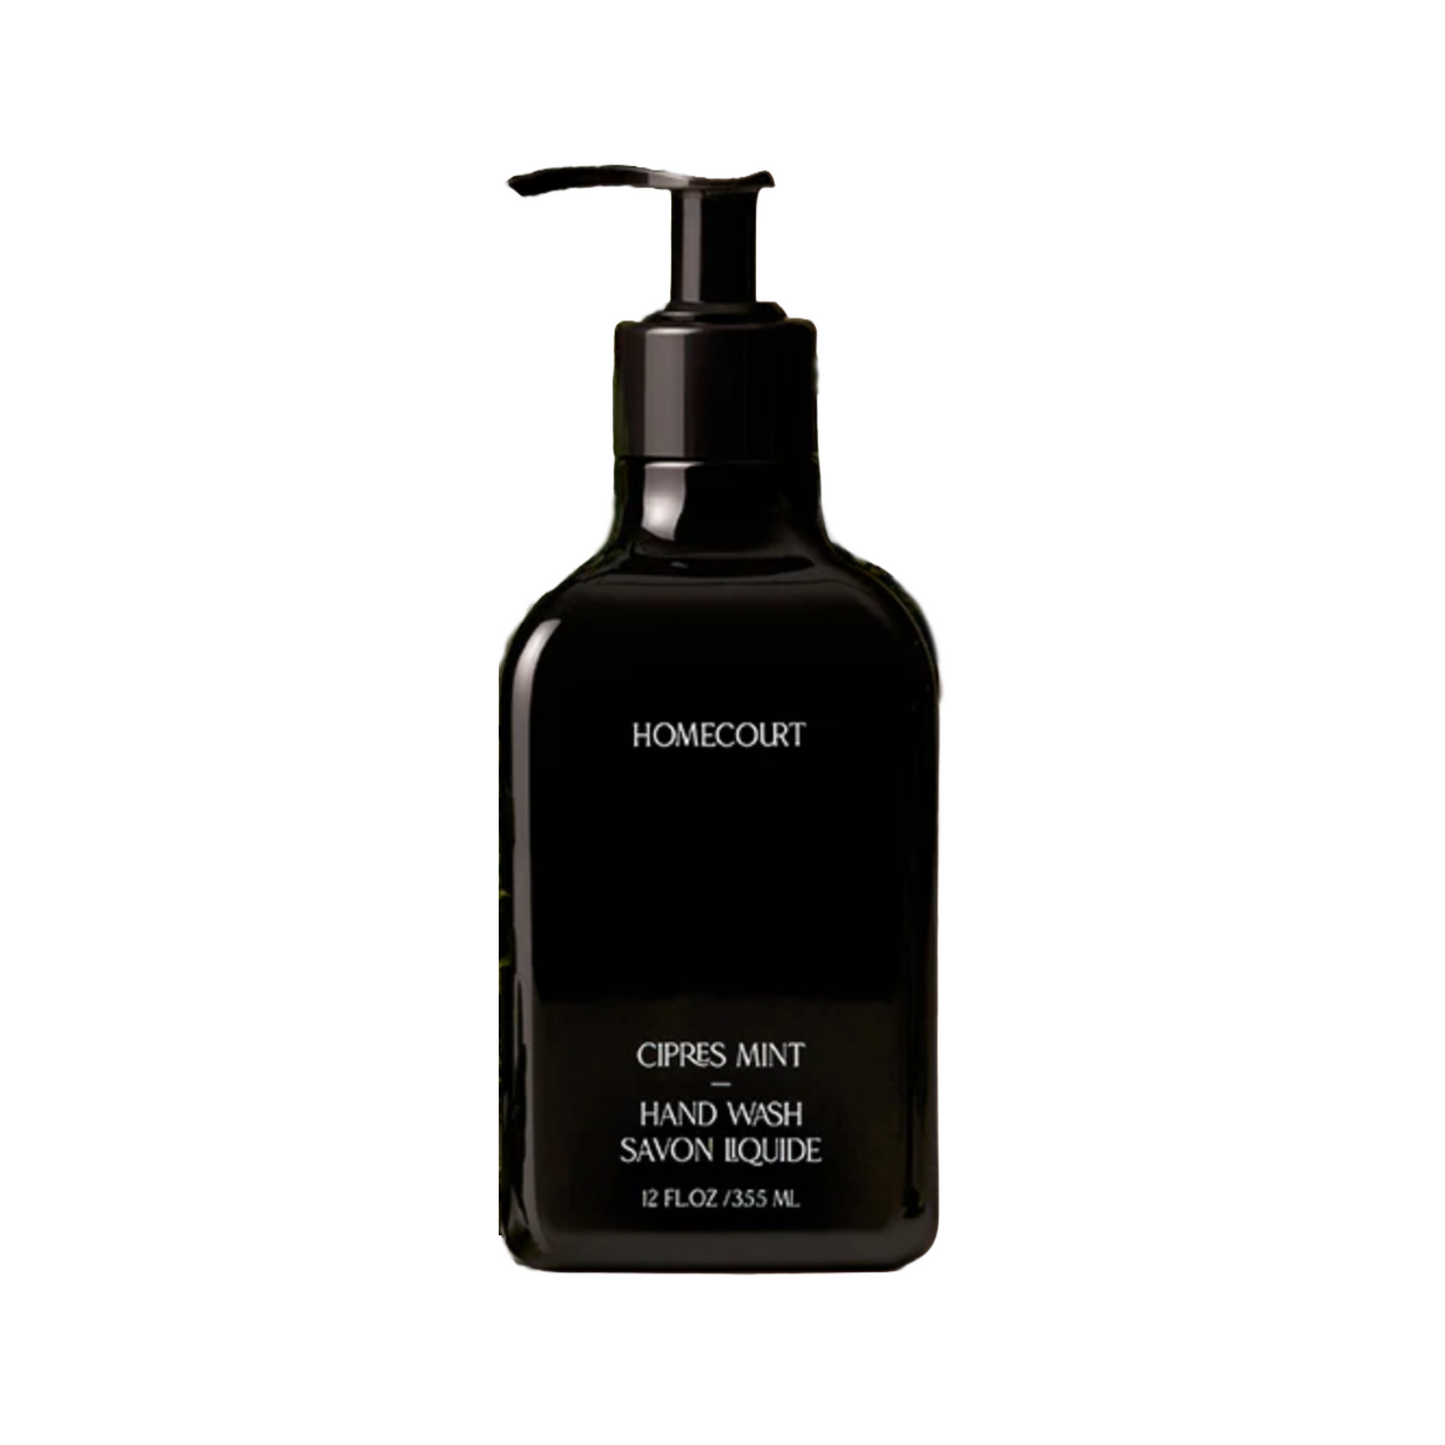 Cipres Mint Hand Wash by Homecourt